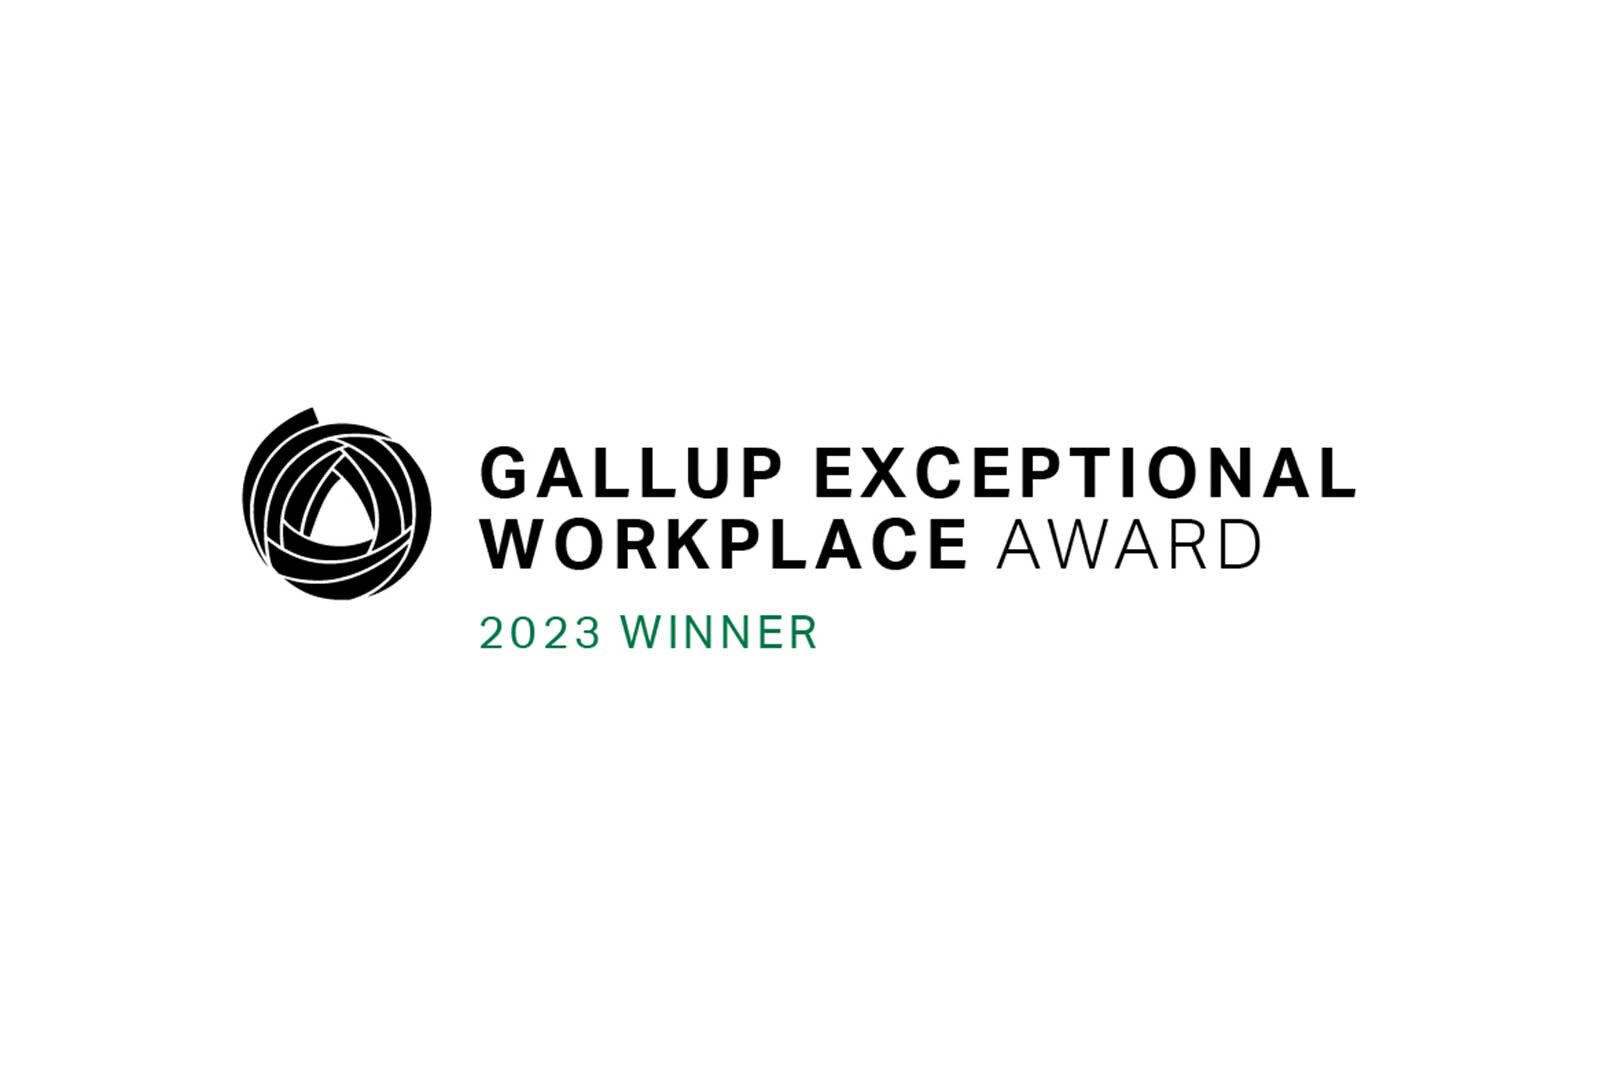 Gallup Exceptional Workplace Award 2023 logo